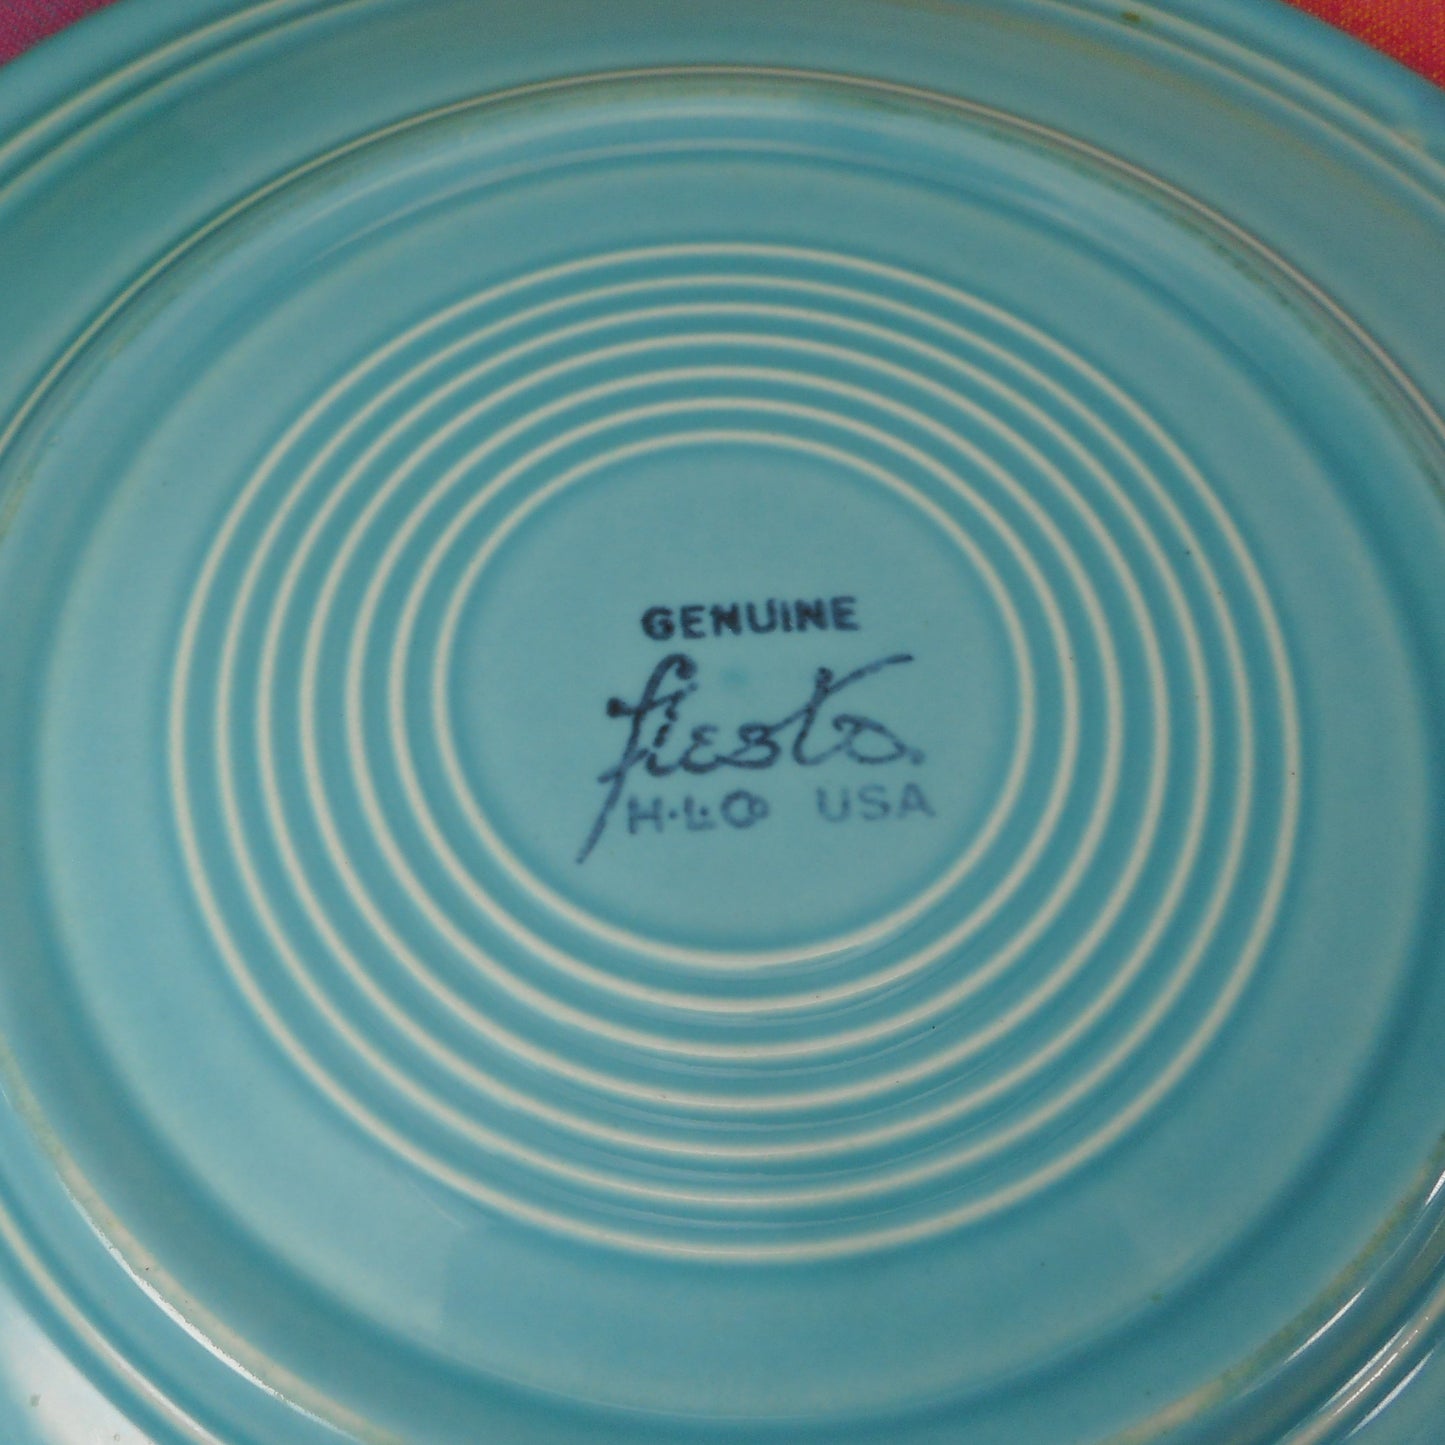 Fiestaware Genuine Vintage Luncheon Plates Turquoise Yellow 9.5" Rings